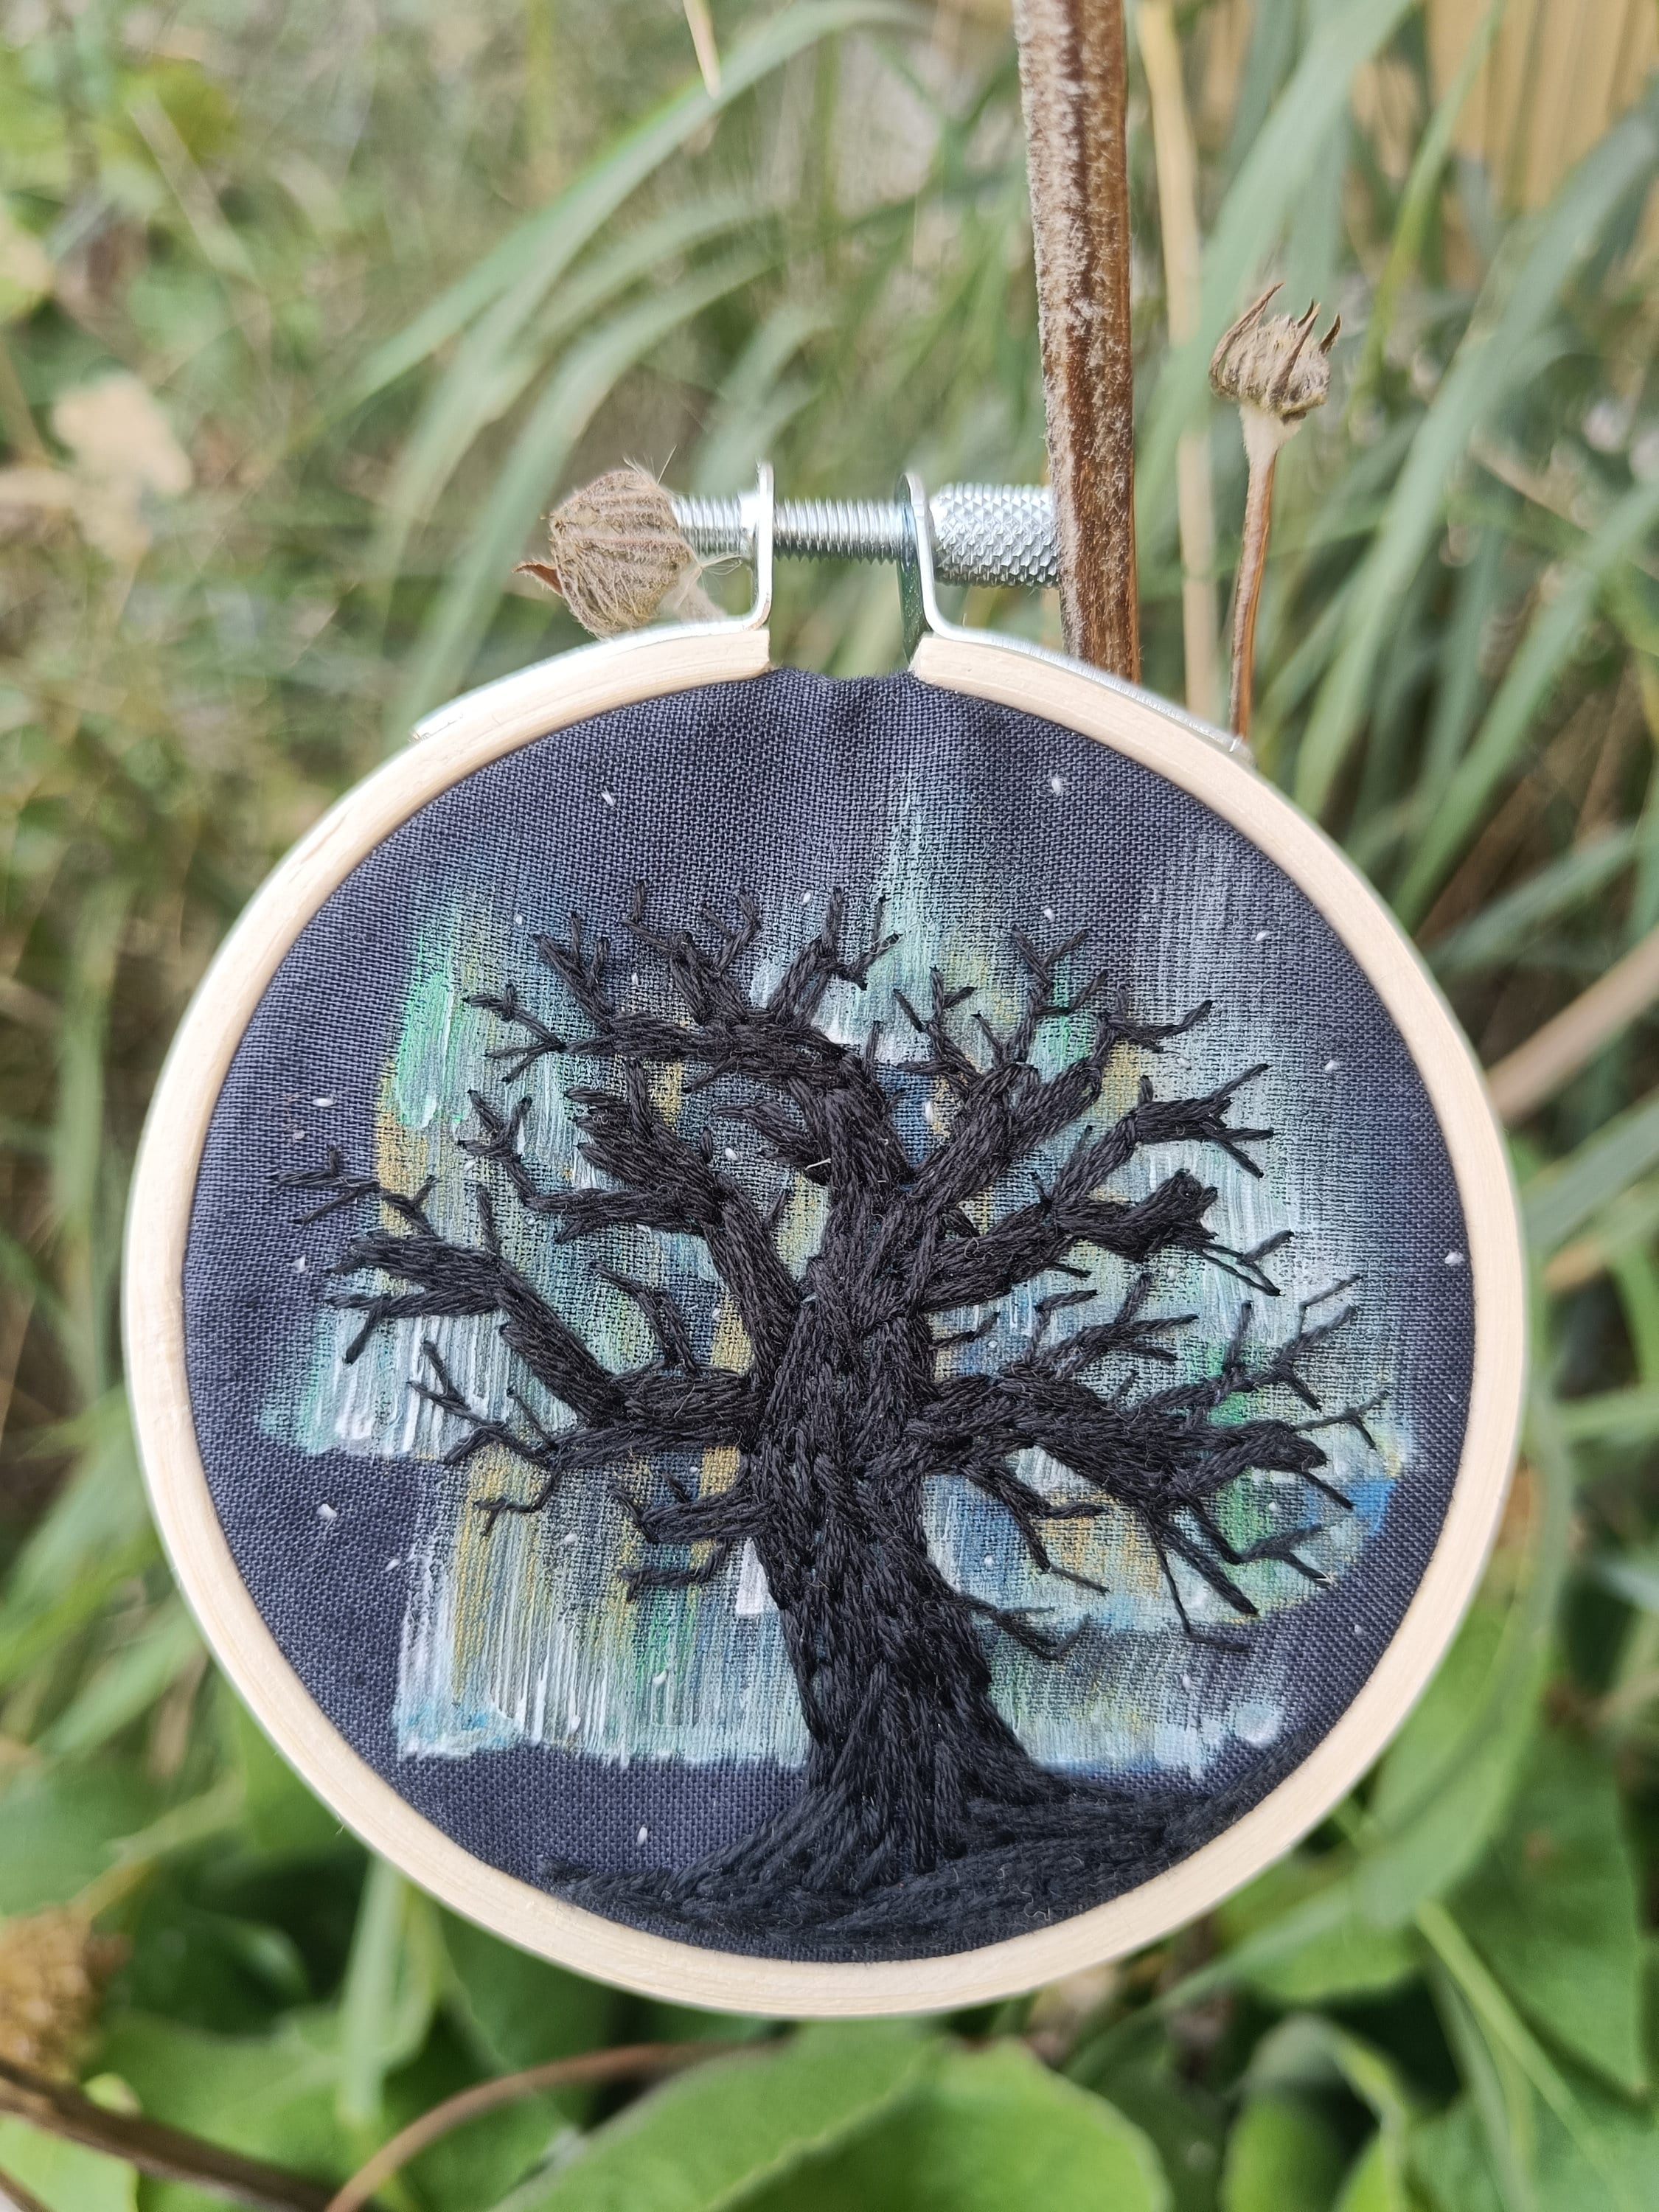 Brilliant Embroideries Capture the Expansive Beauty of the Aurora Borealis  in Small Hoops